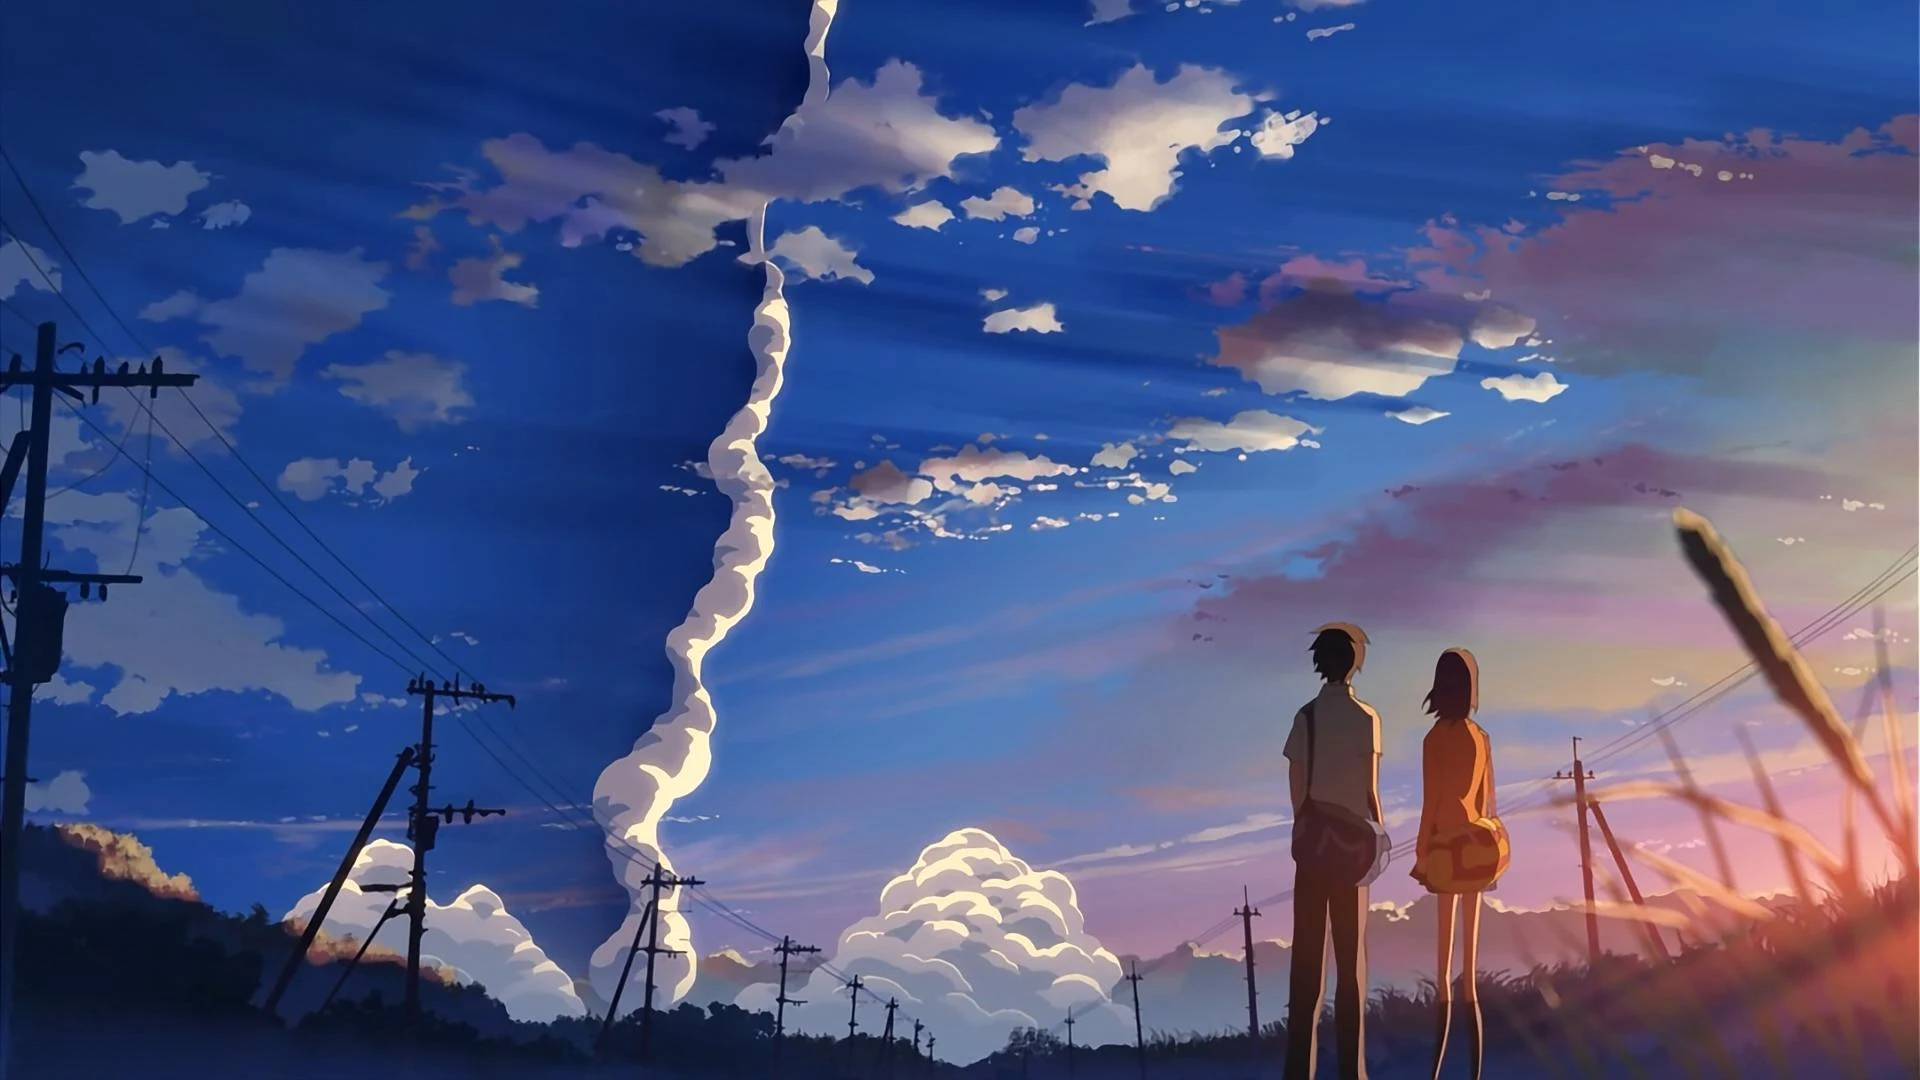 HD Wallpaper 5 from centimeters per second anime